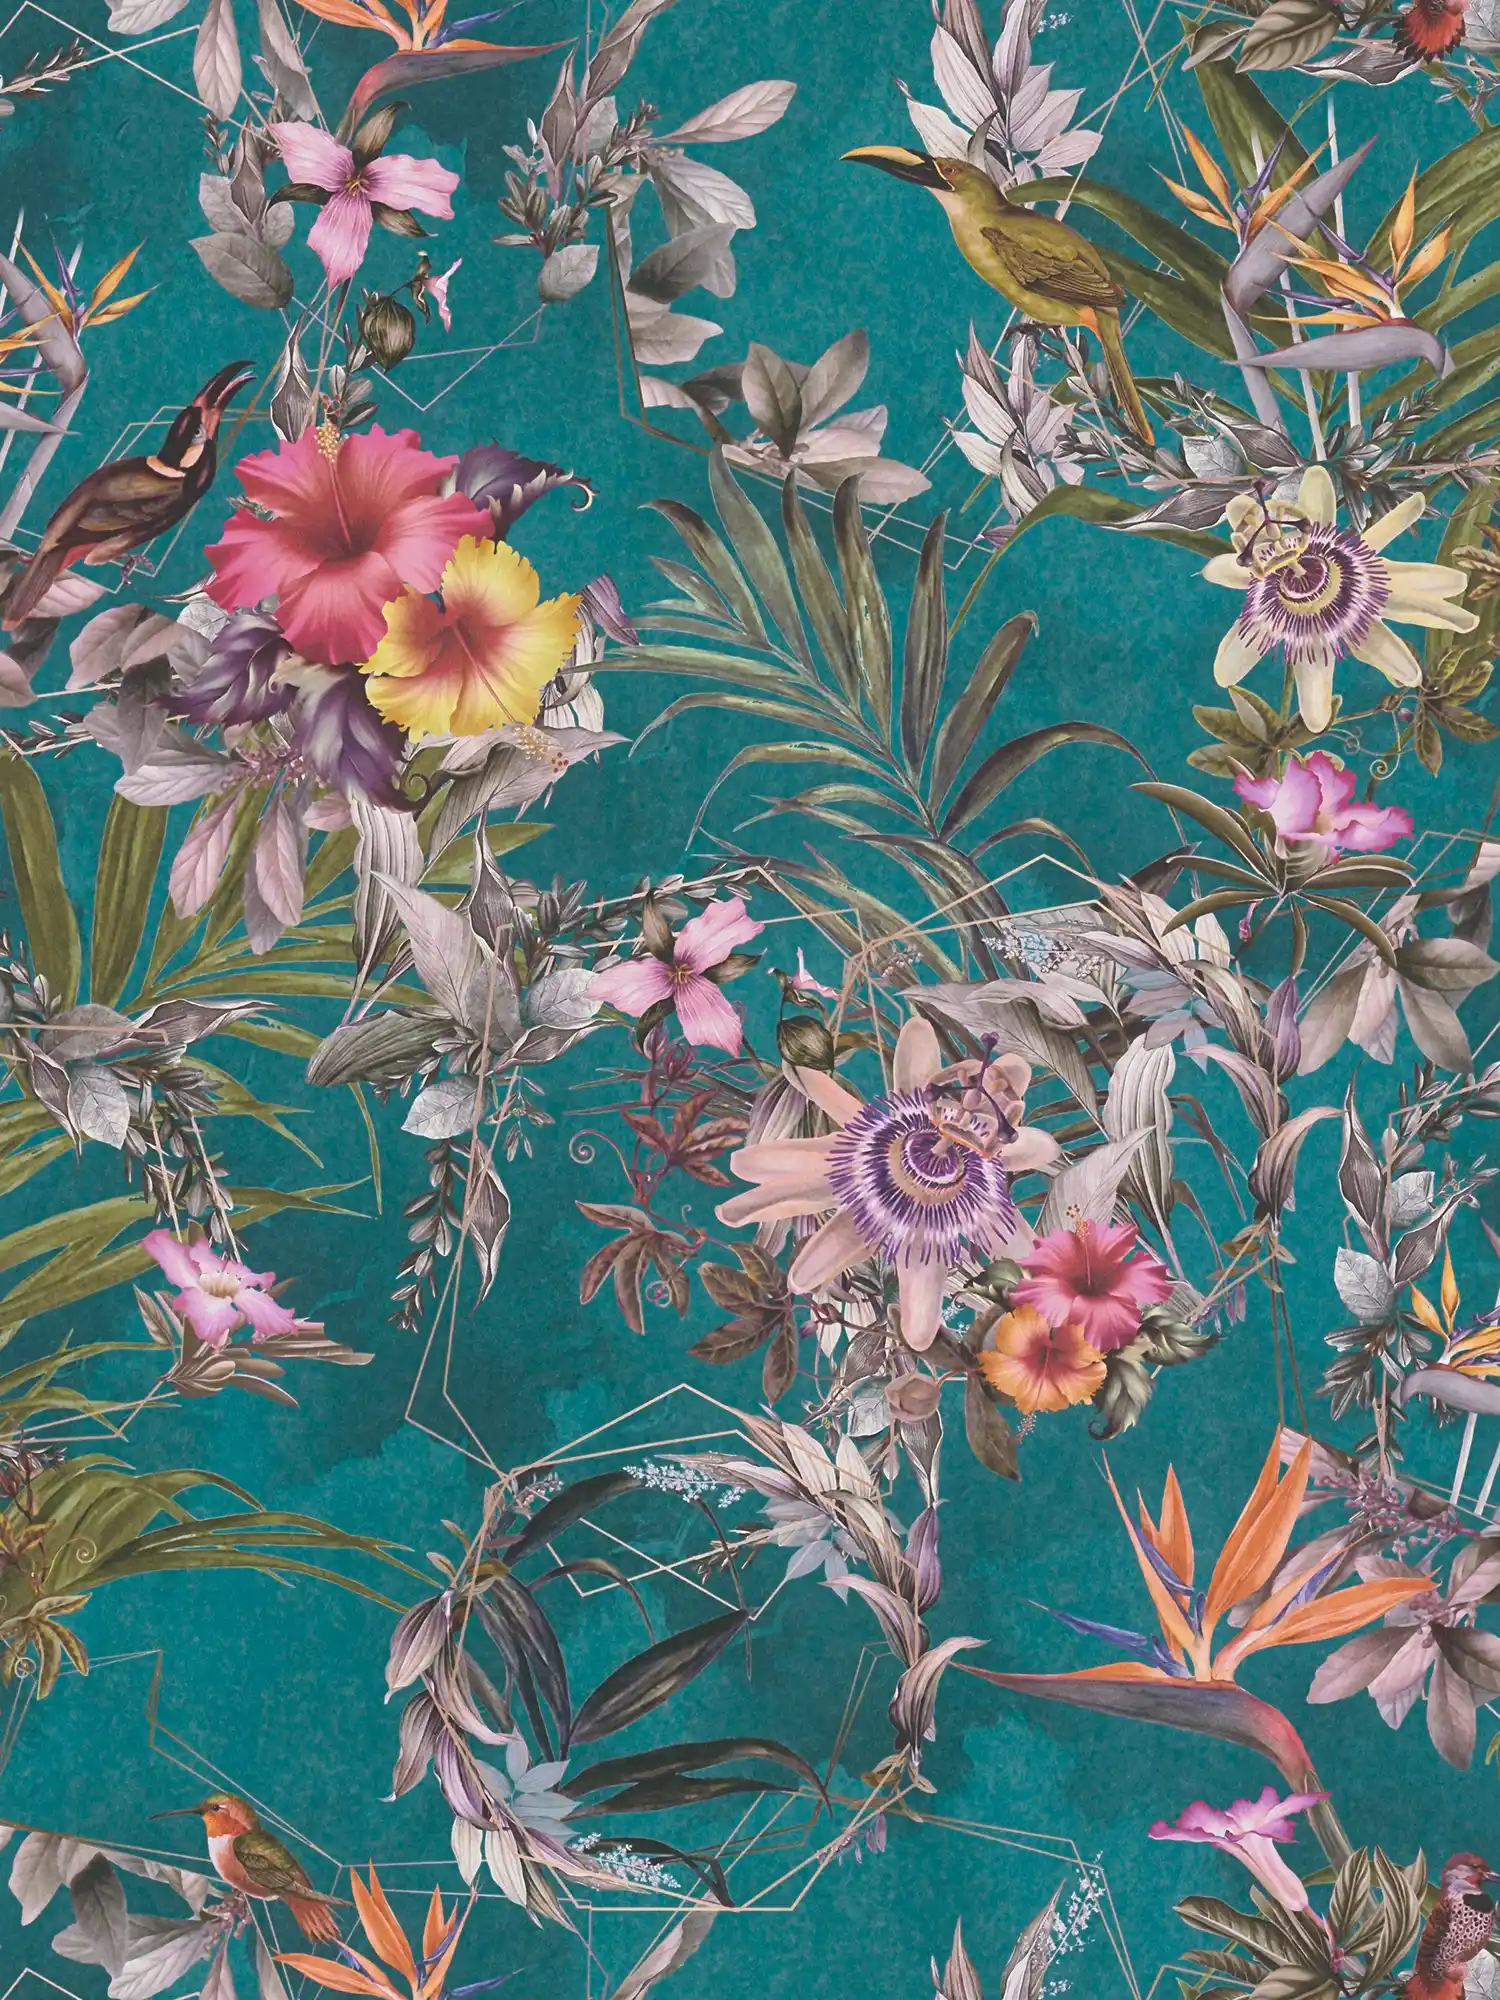 Jungle wallpaper tropical flowers & birds - turquoise, green, colourful
